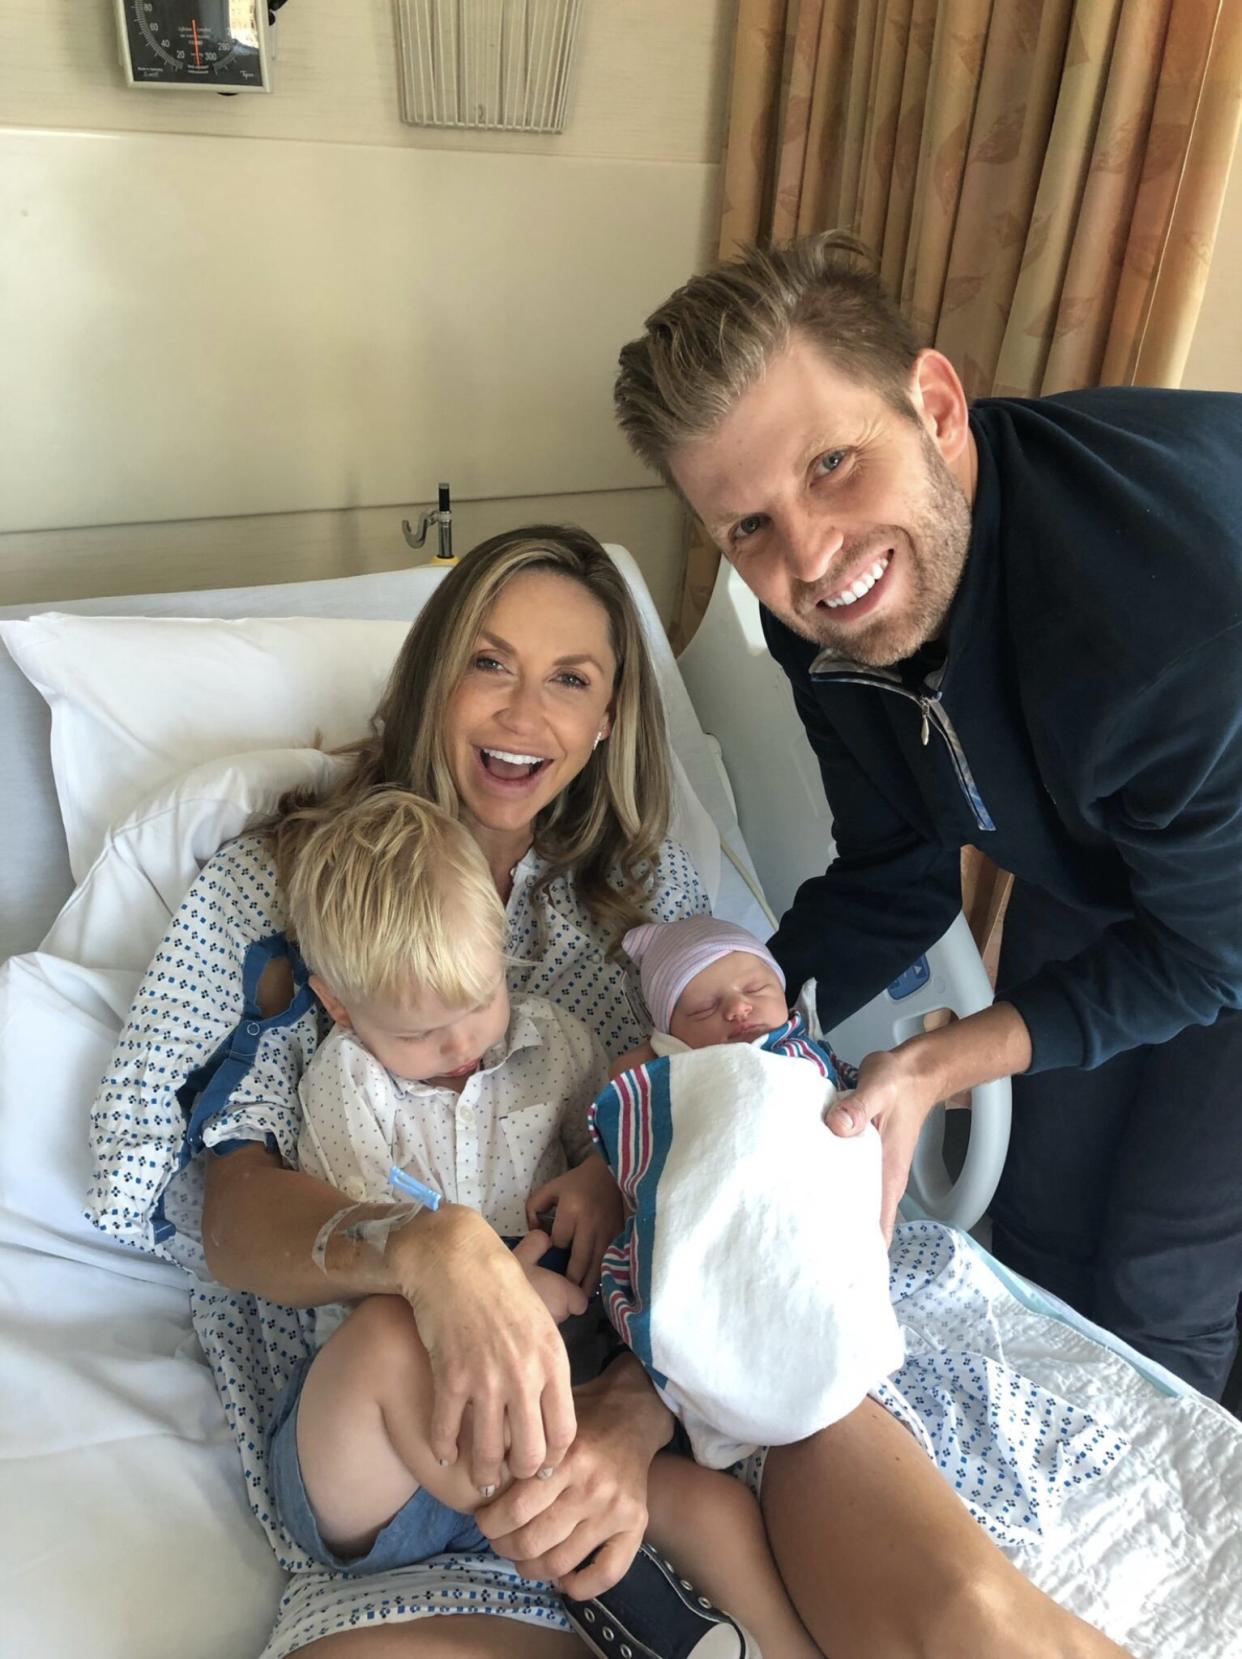 Eric Trump and wife Lara Lea Trump became a family of four on Monday, Aug. 19, 2019. The couple welcomed baby girl Carolina. They already have a nearly 2-year-old son together.